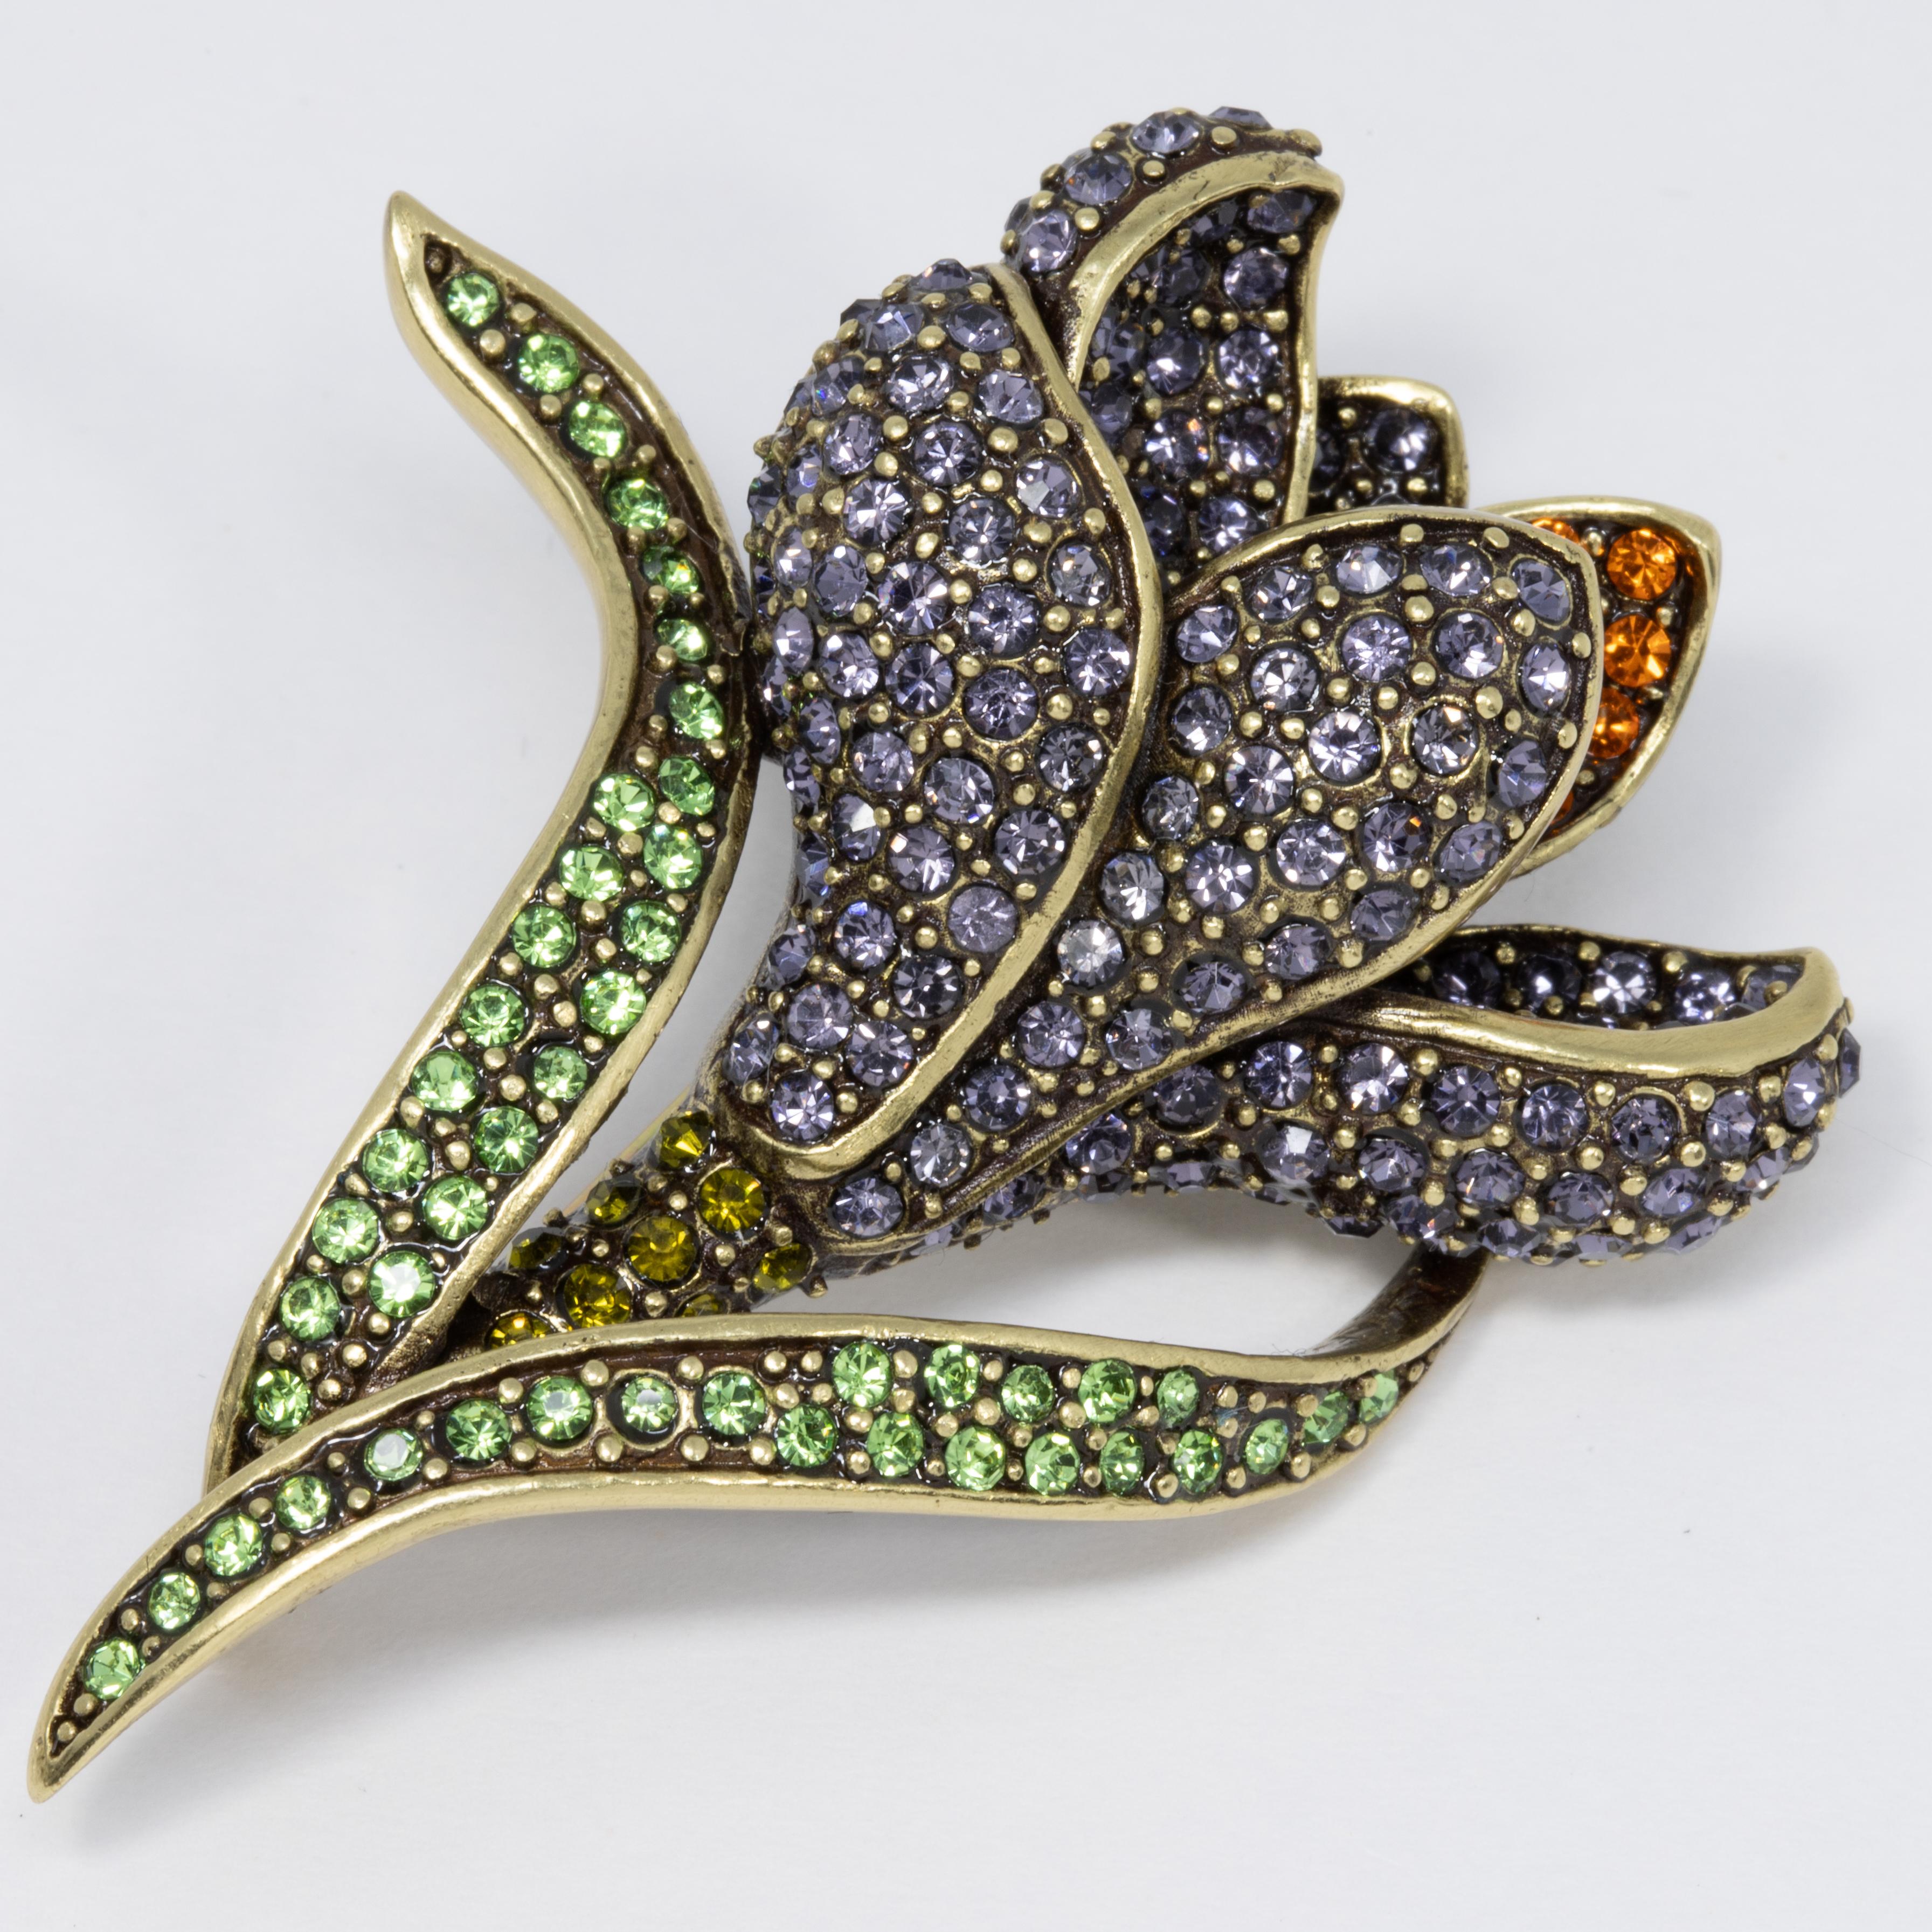 Add an elegant floral touch to your style with this flower brooch from Heidi Daus. Accented with pave lilac, peridot, and tangerine crystals, this gorgeous flower pin sparkles like no other!

Limited-time, retired collection.

Hallmarks: Heidi Daus,